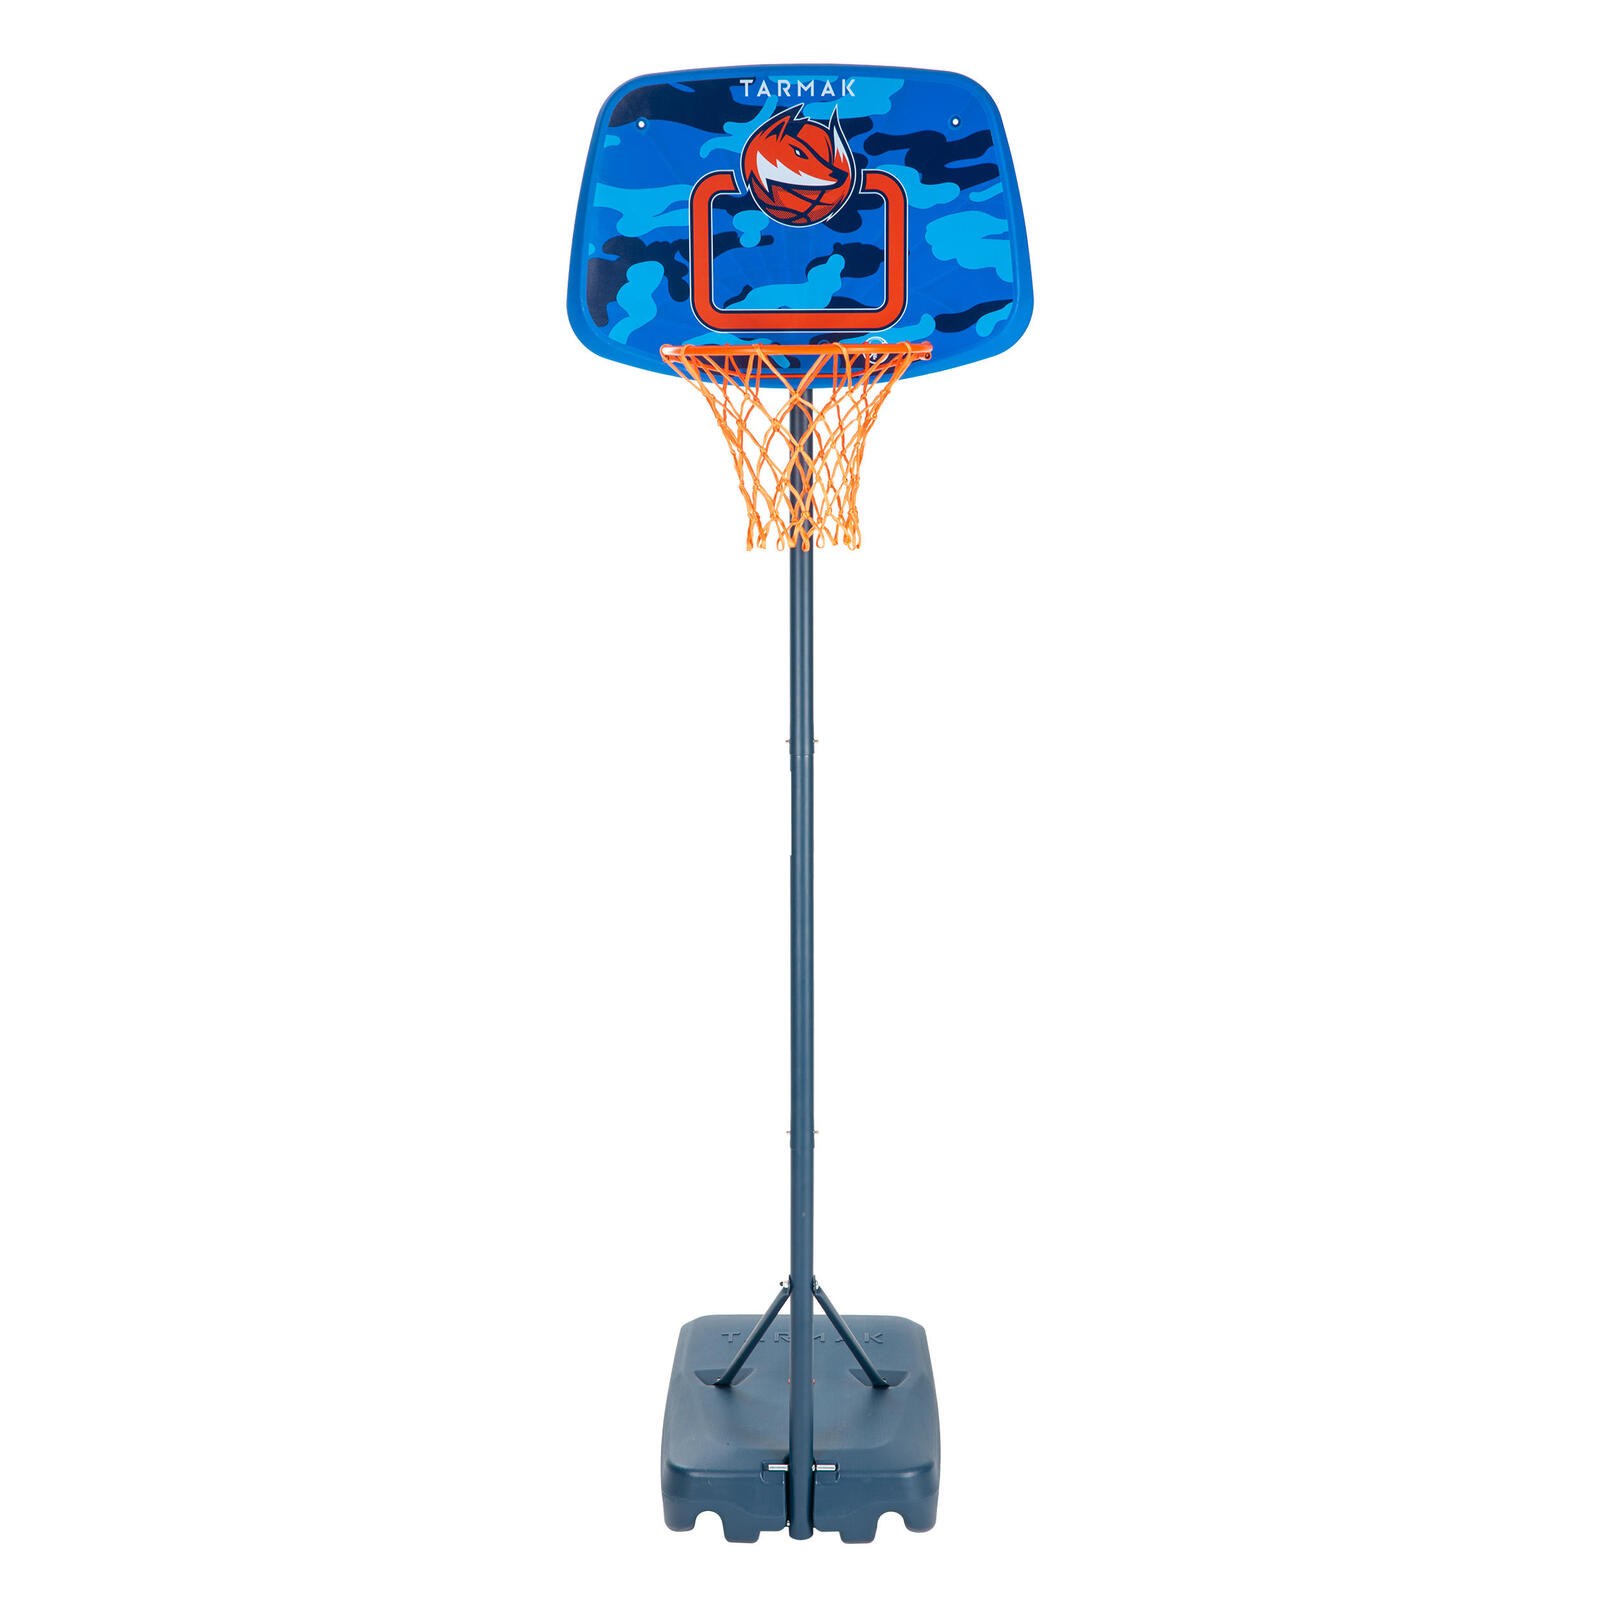 Kids' basketball hoop k500 - 1.30m to 1.60m. Up to 8 years old.